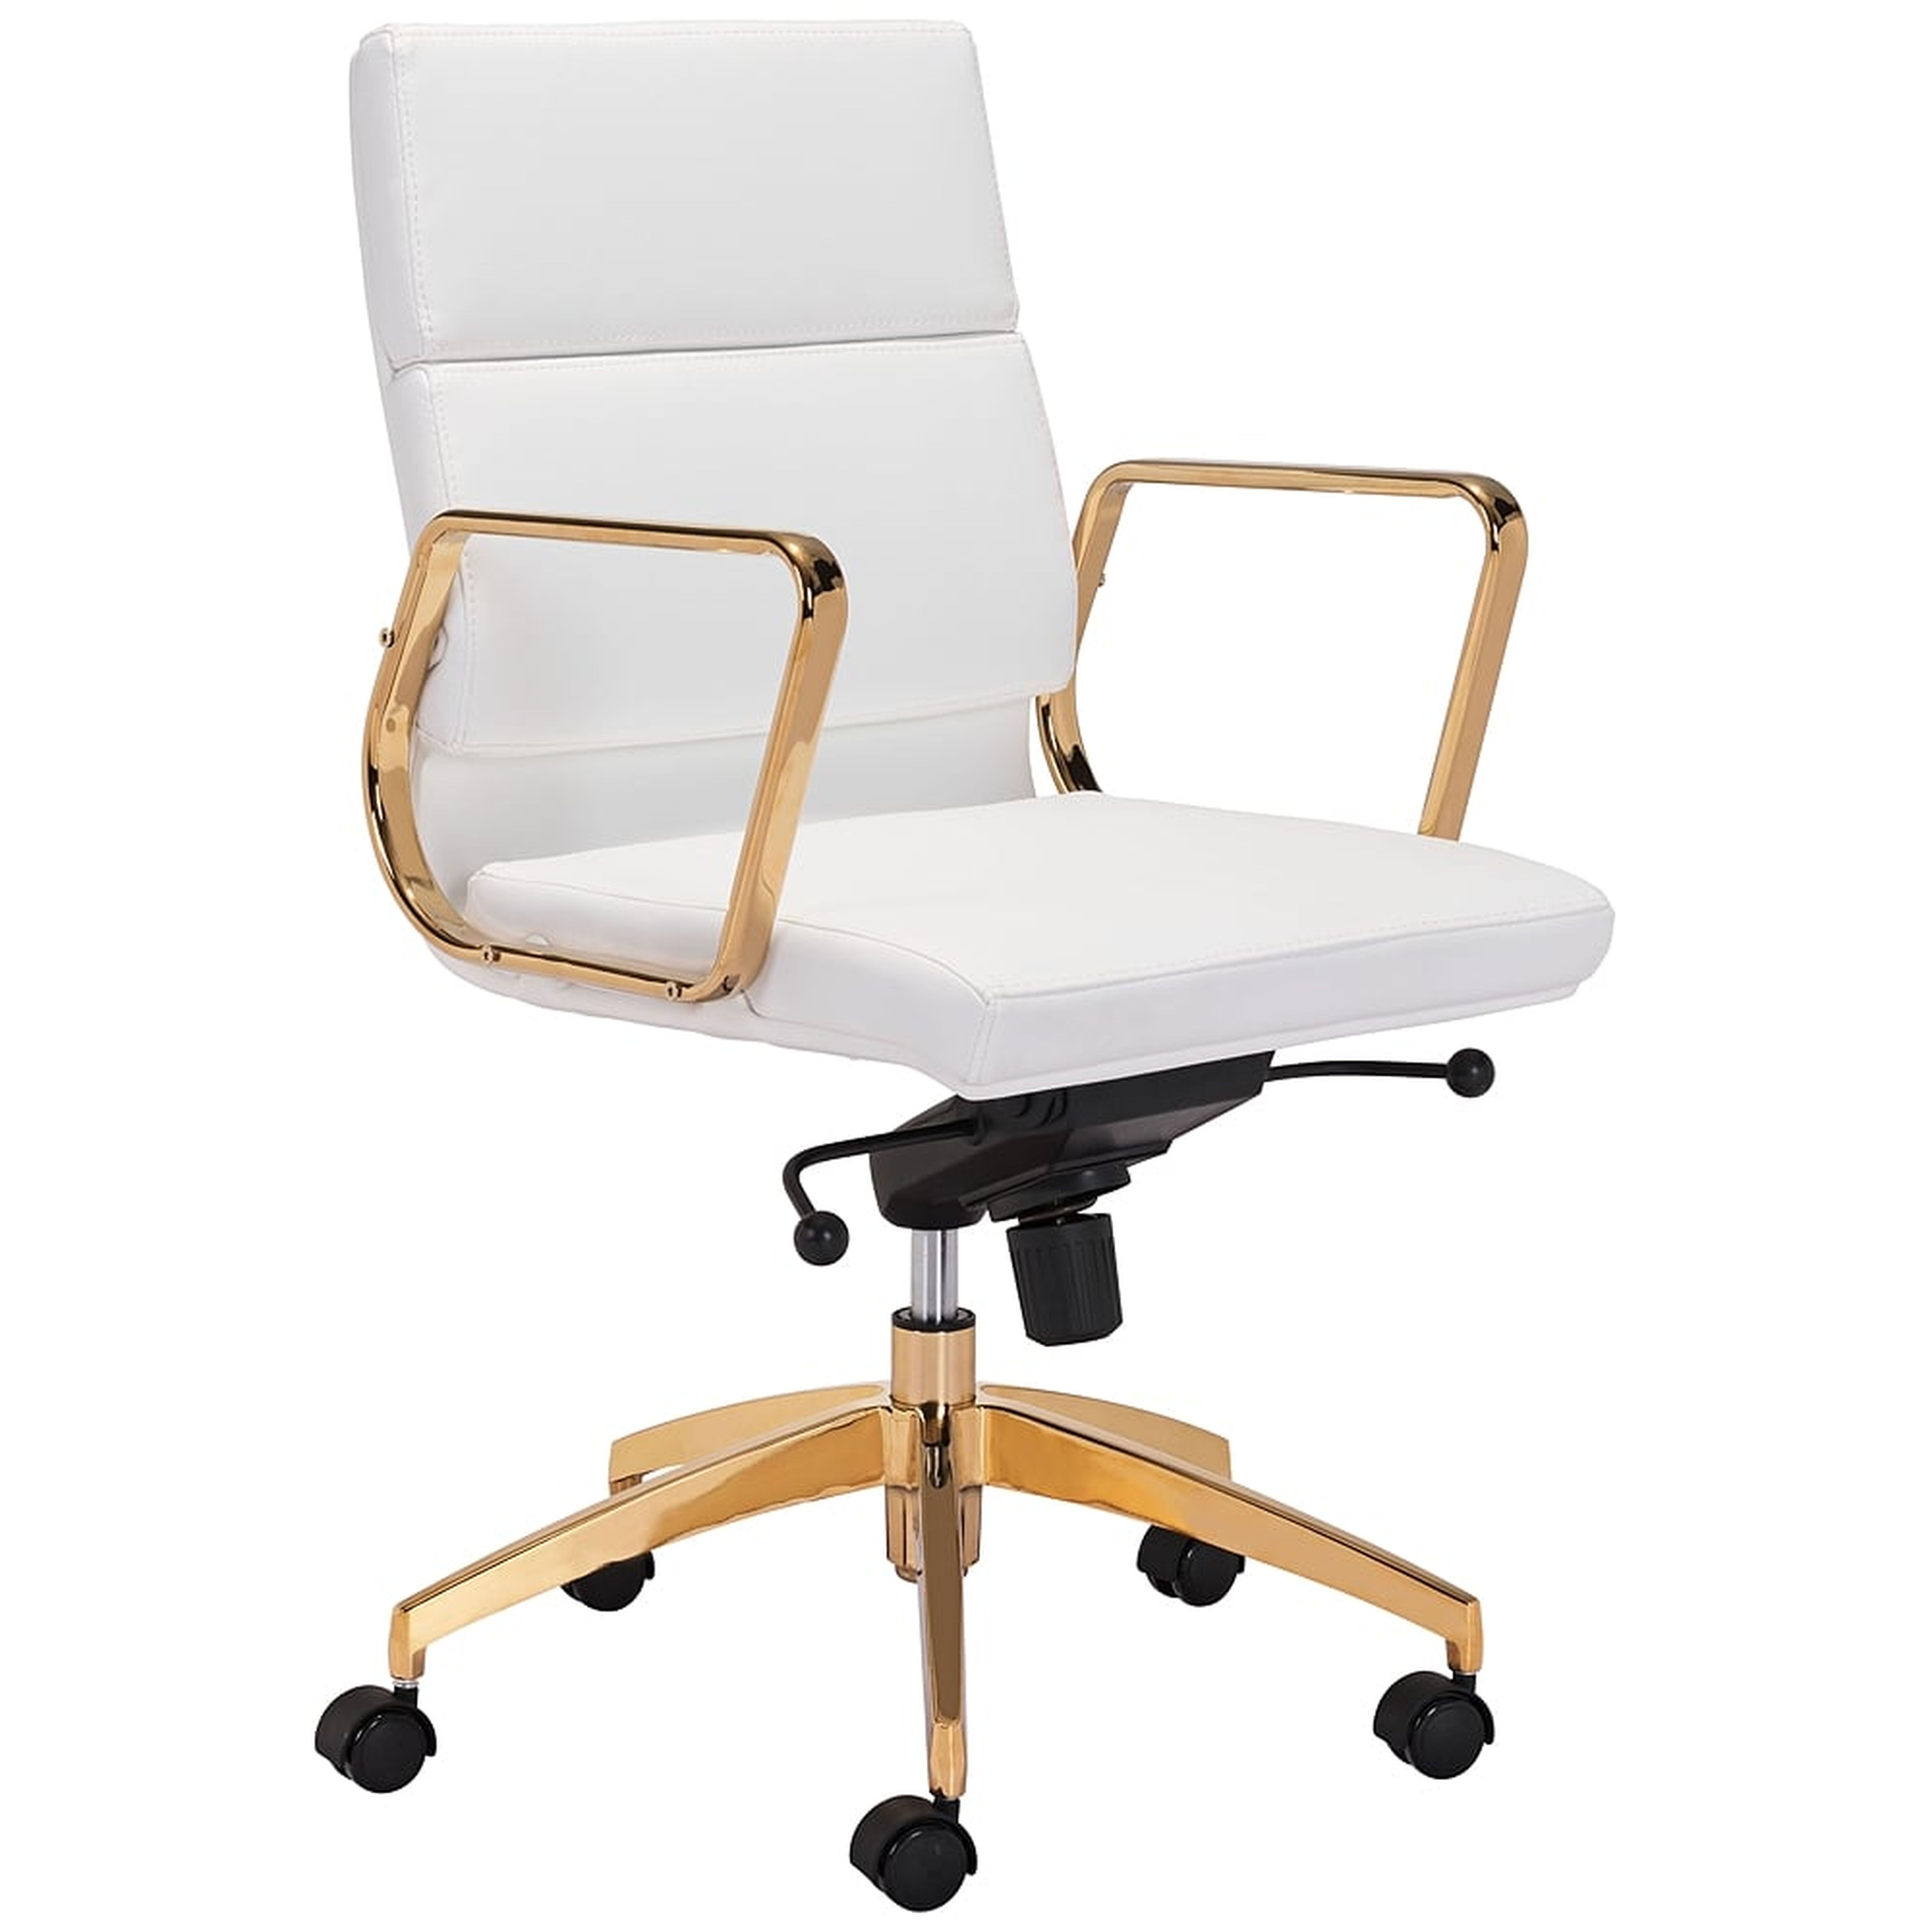 Scientist White and Gold Low Back Adjustable Office Chair - Style # 60D02 - Lamps Plus